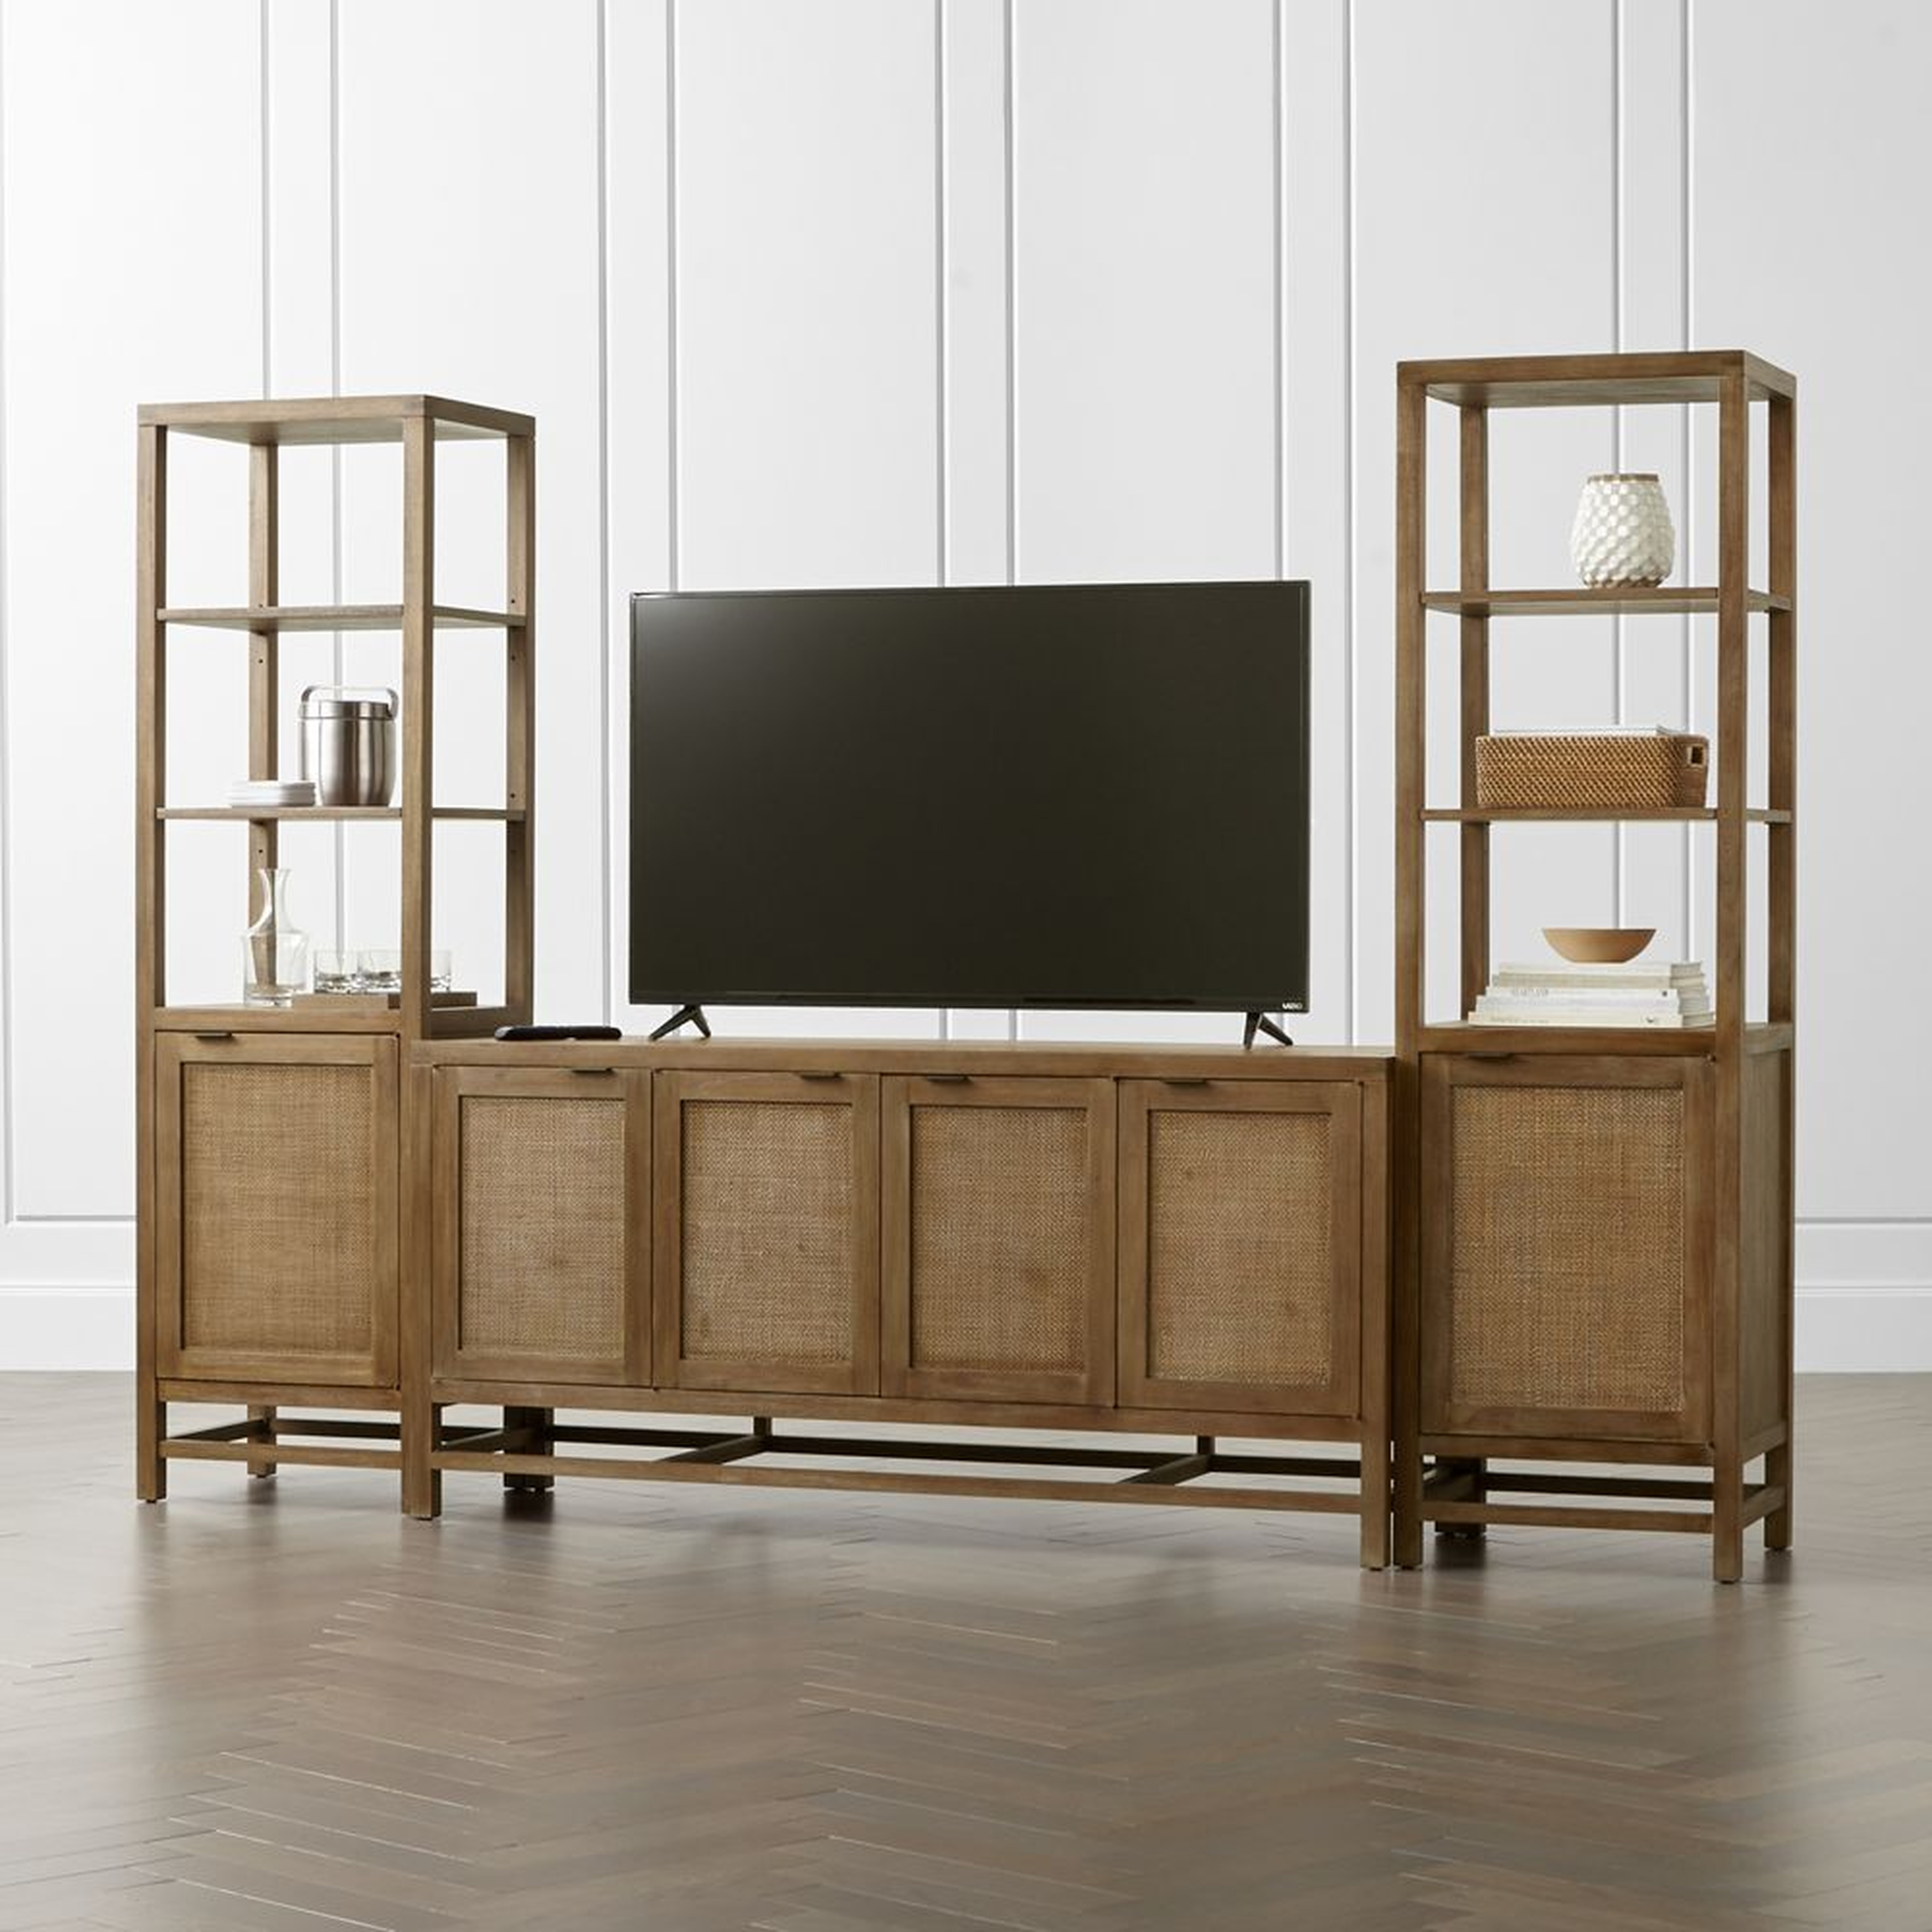 Blake 68" Light Brown Teak and Rattan Storage Media Console with 2 Tall Cabinets - Crate and Barrel